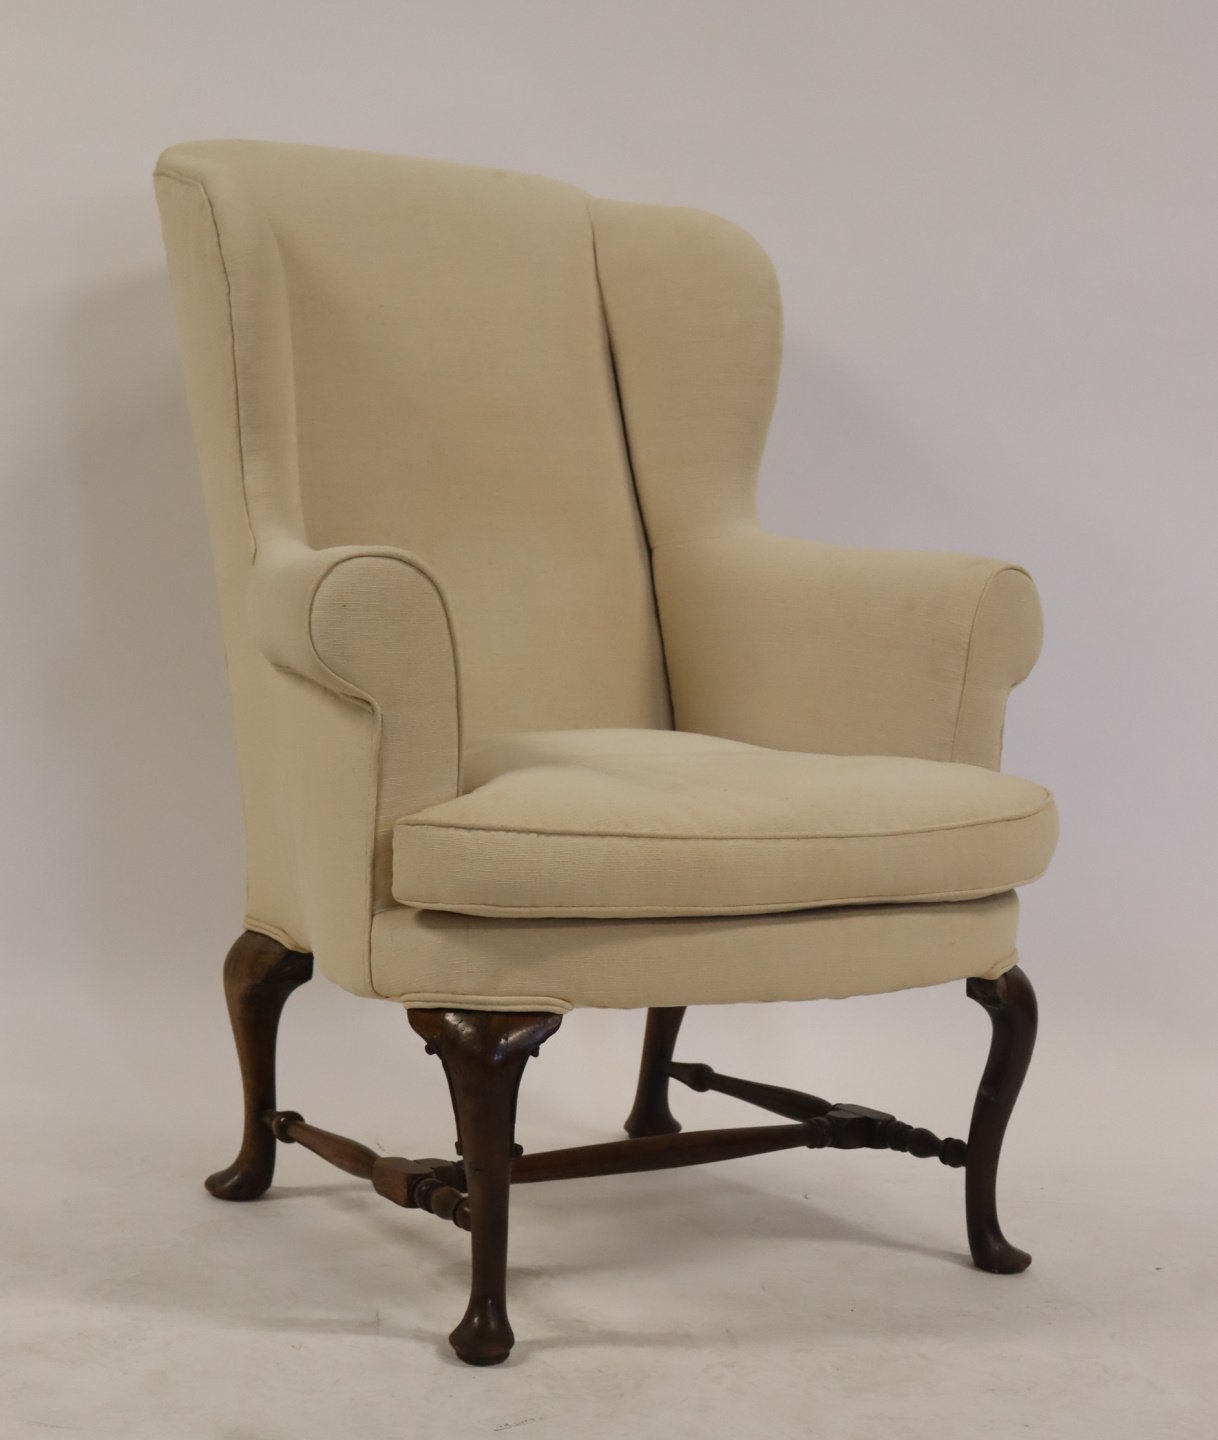 ANTIQUE UPHOLSTERED QUEEN ANNE